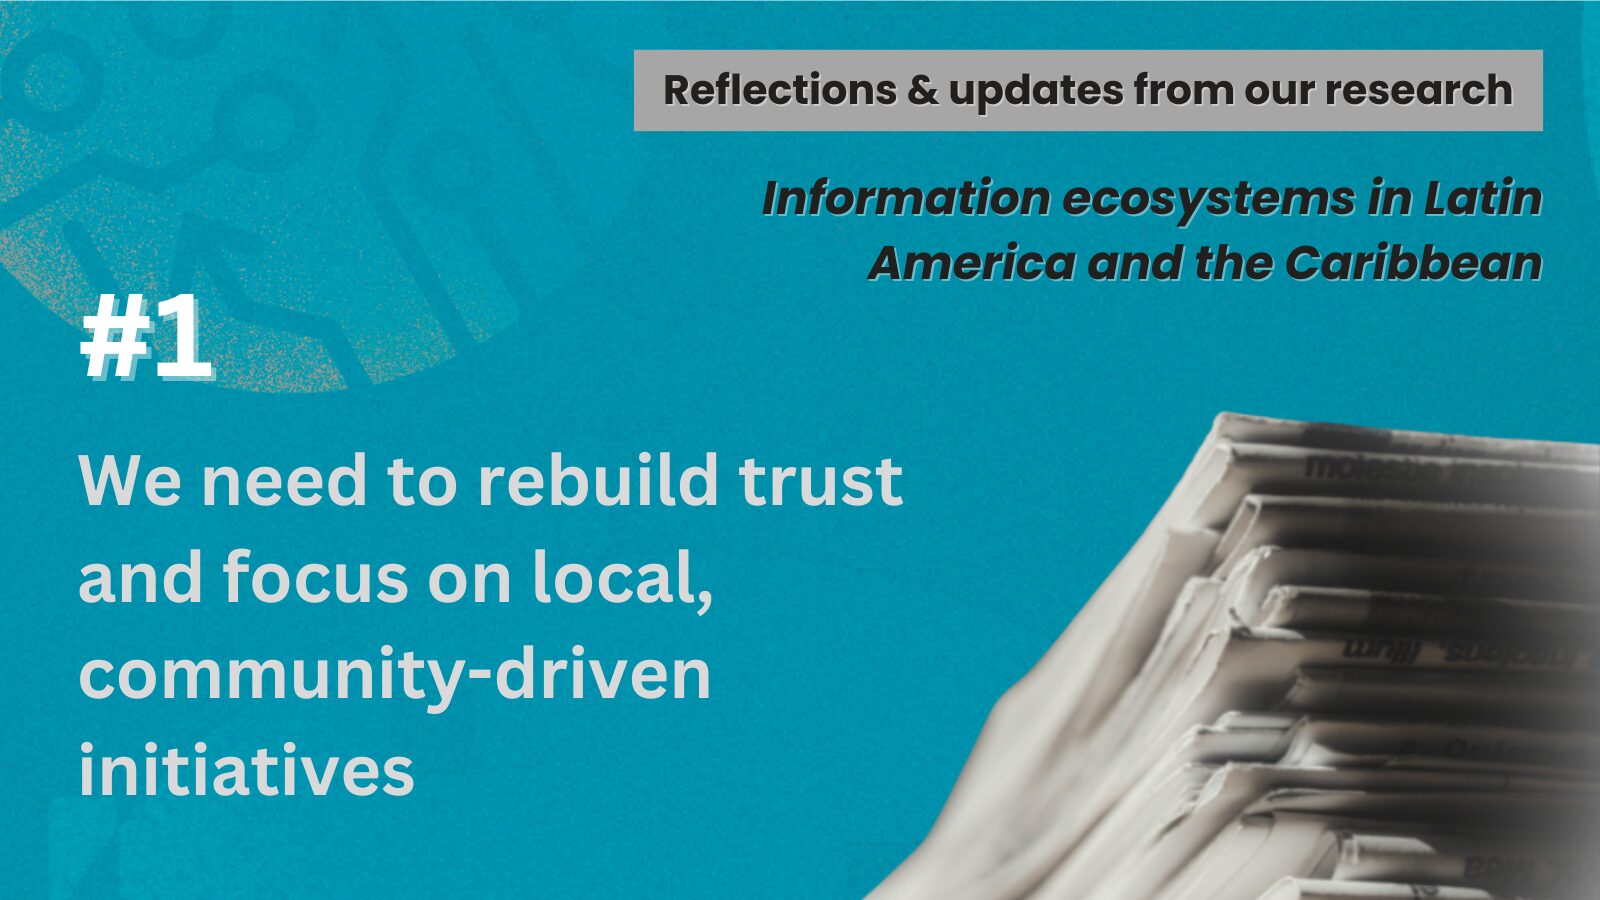 To improve the information ecosystem we need to rebuild trust and focus on local, community-driven initiatives